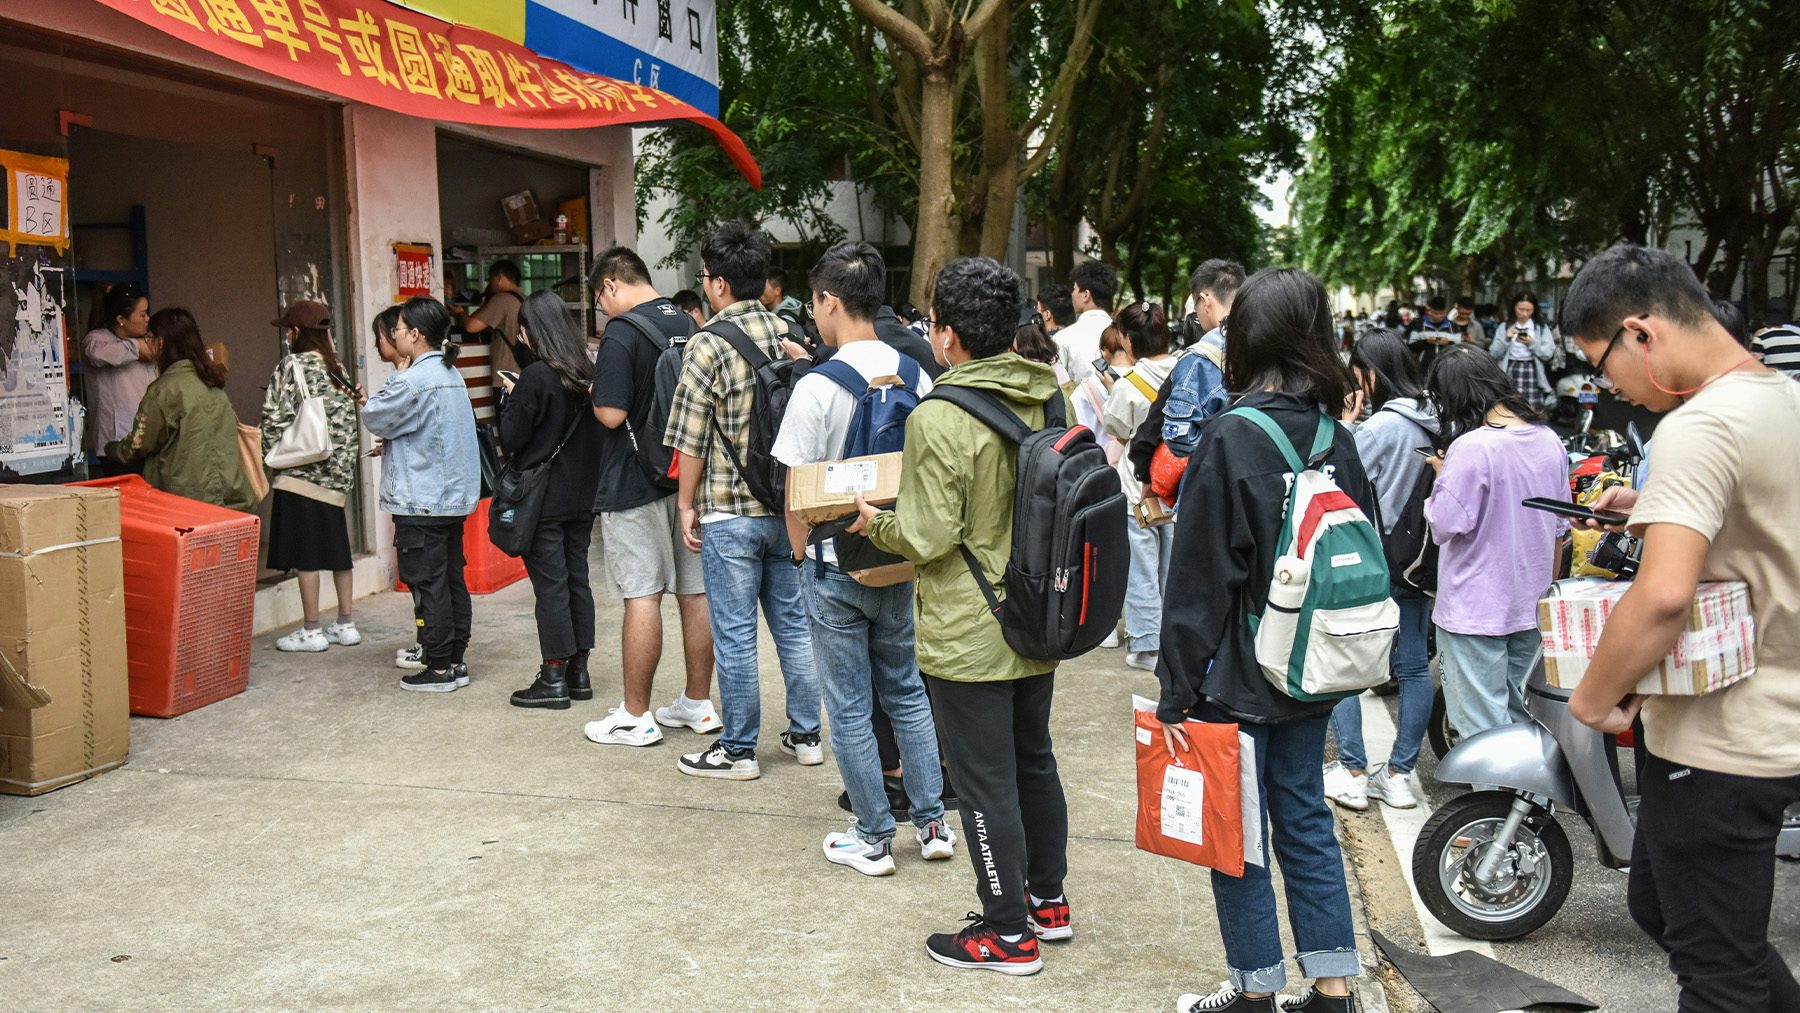 College students queue to pick up packages at an online shopping pick up point during a shopping festival. Getty Images.